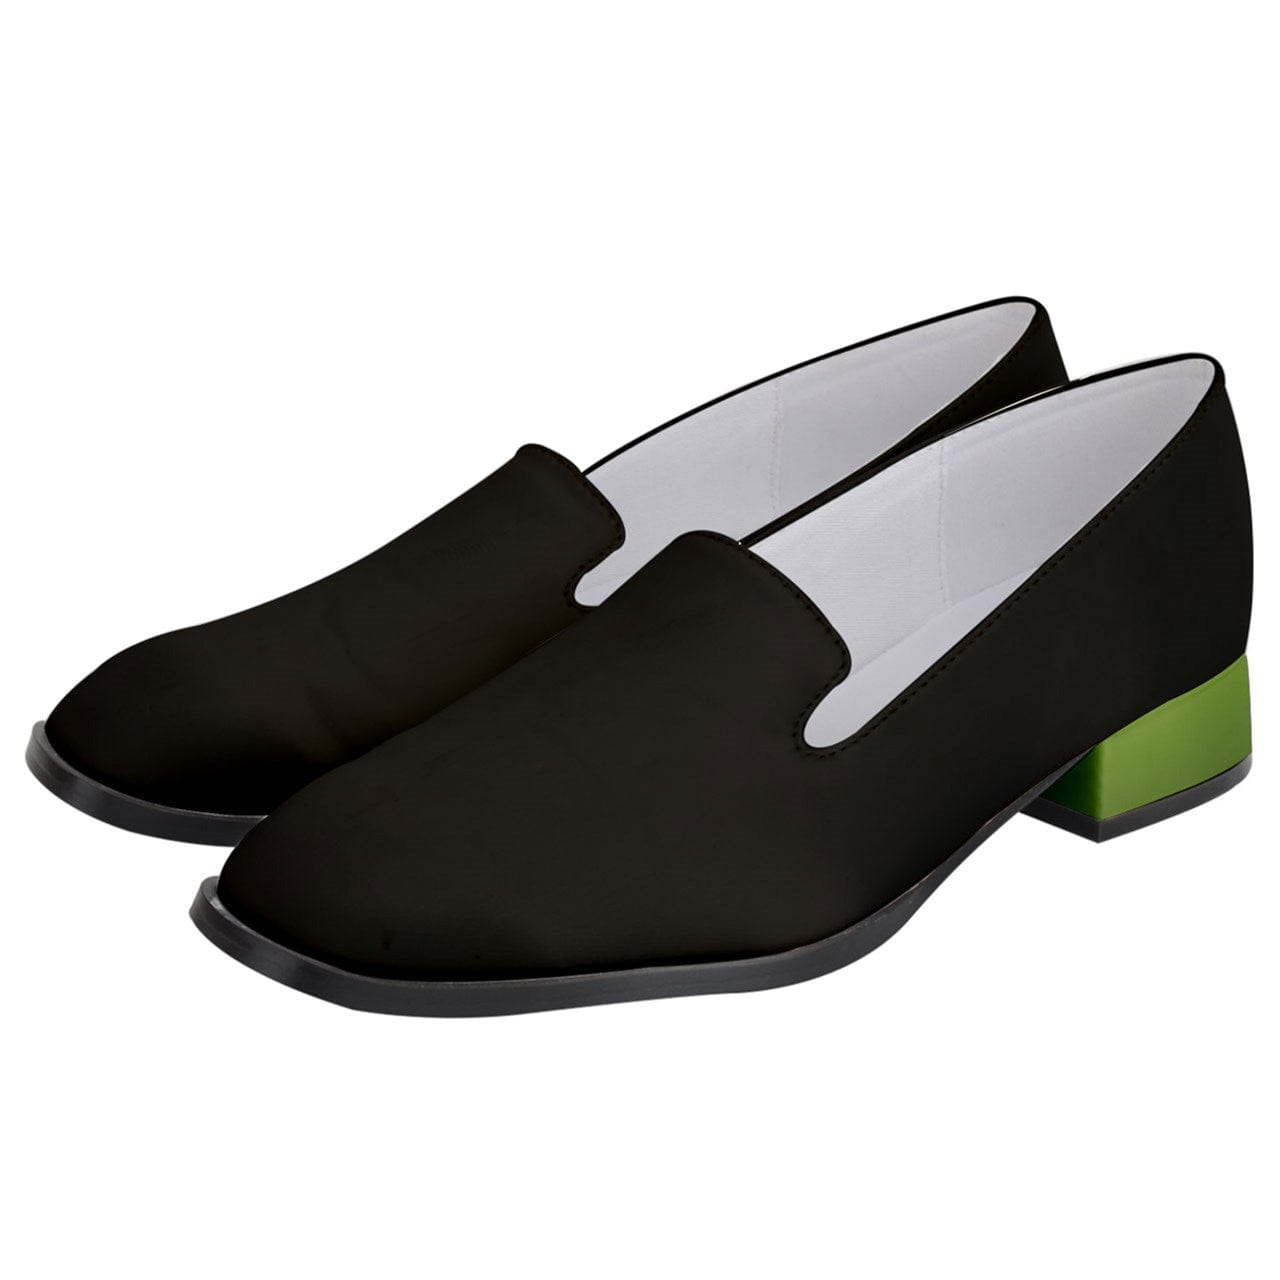 Classic Loafer Low Heels - Black and Green